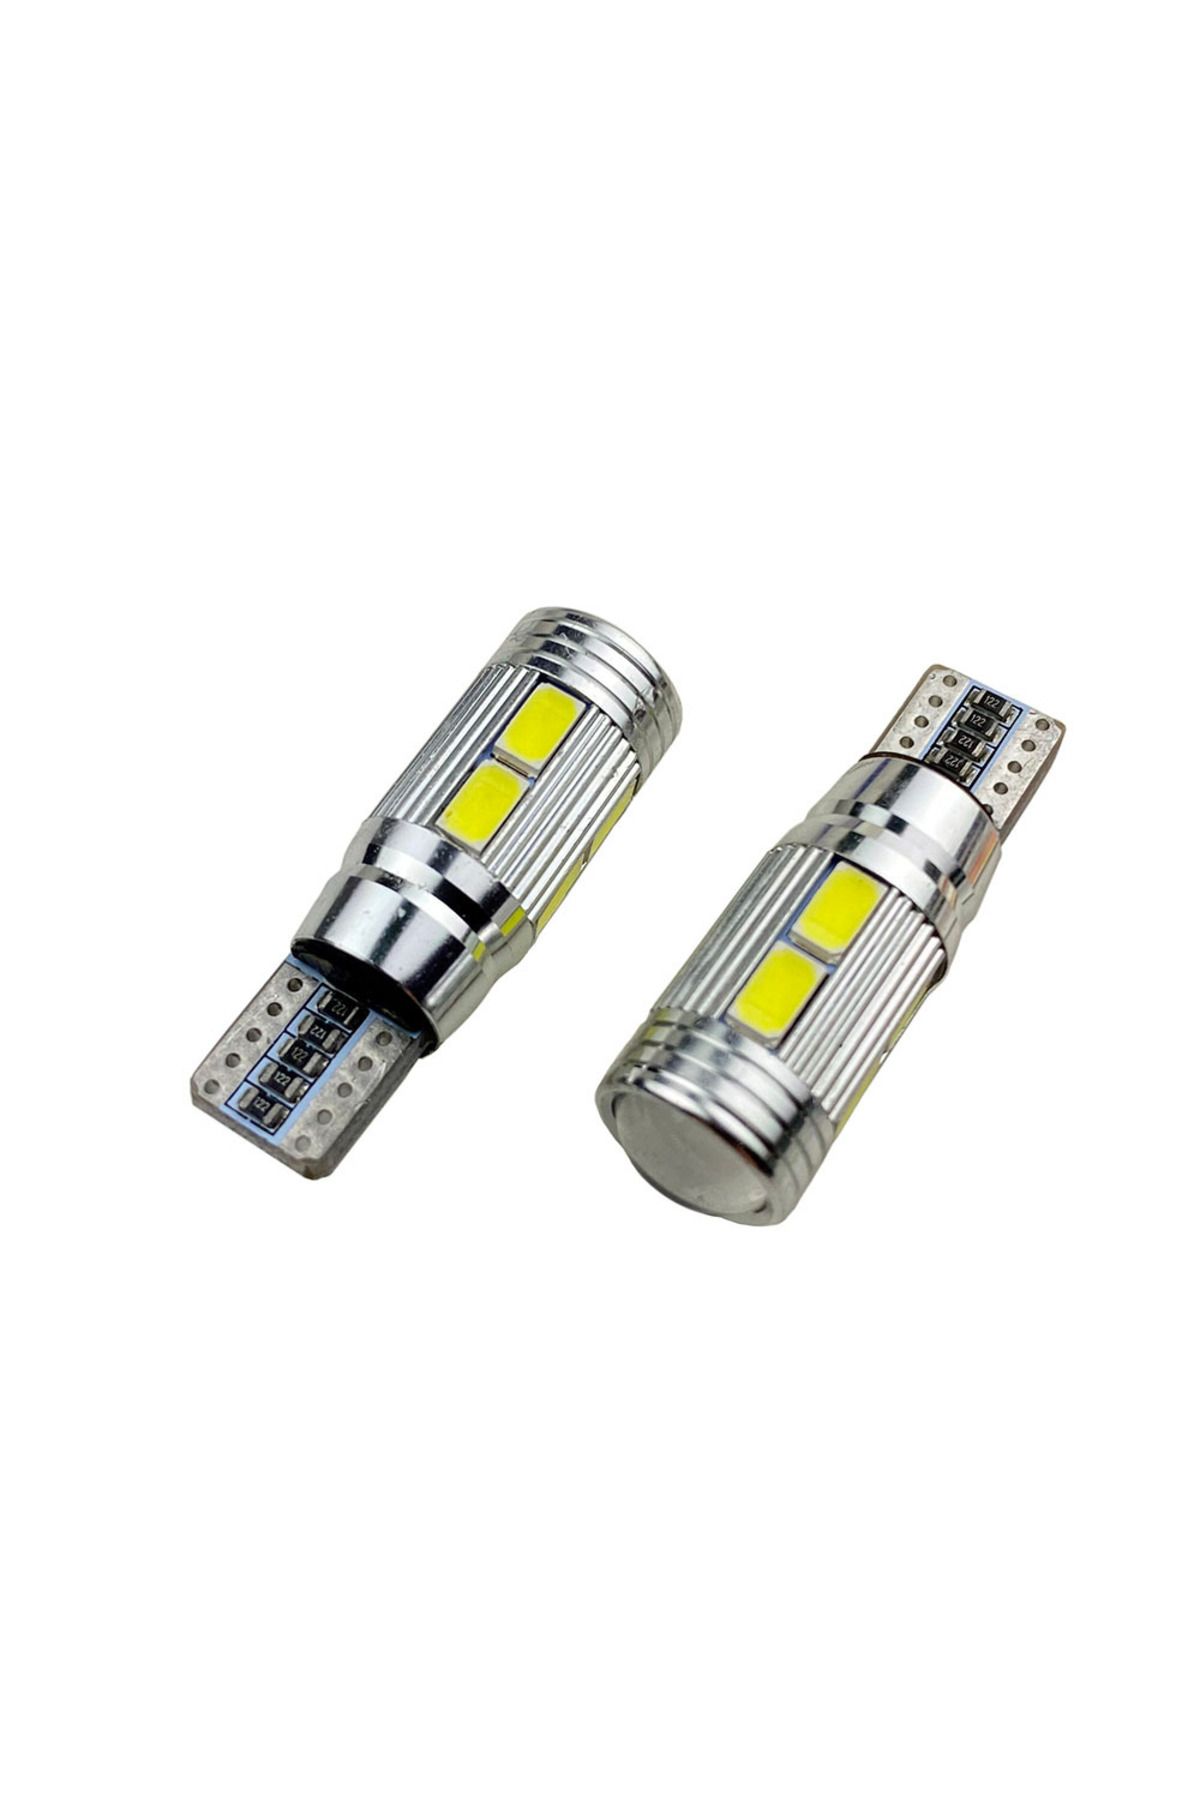 Space Led Ampul T10 10smd Canbus Beyaz / Laam230.2.12